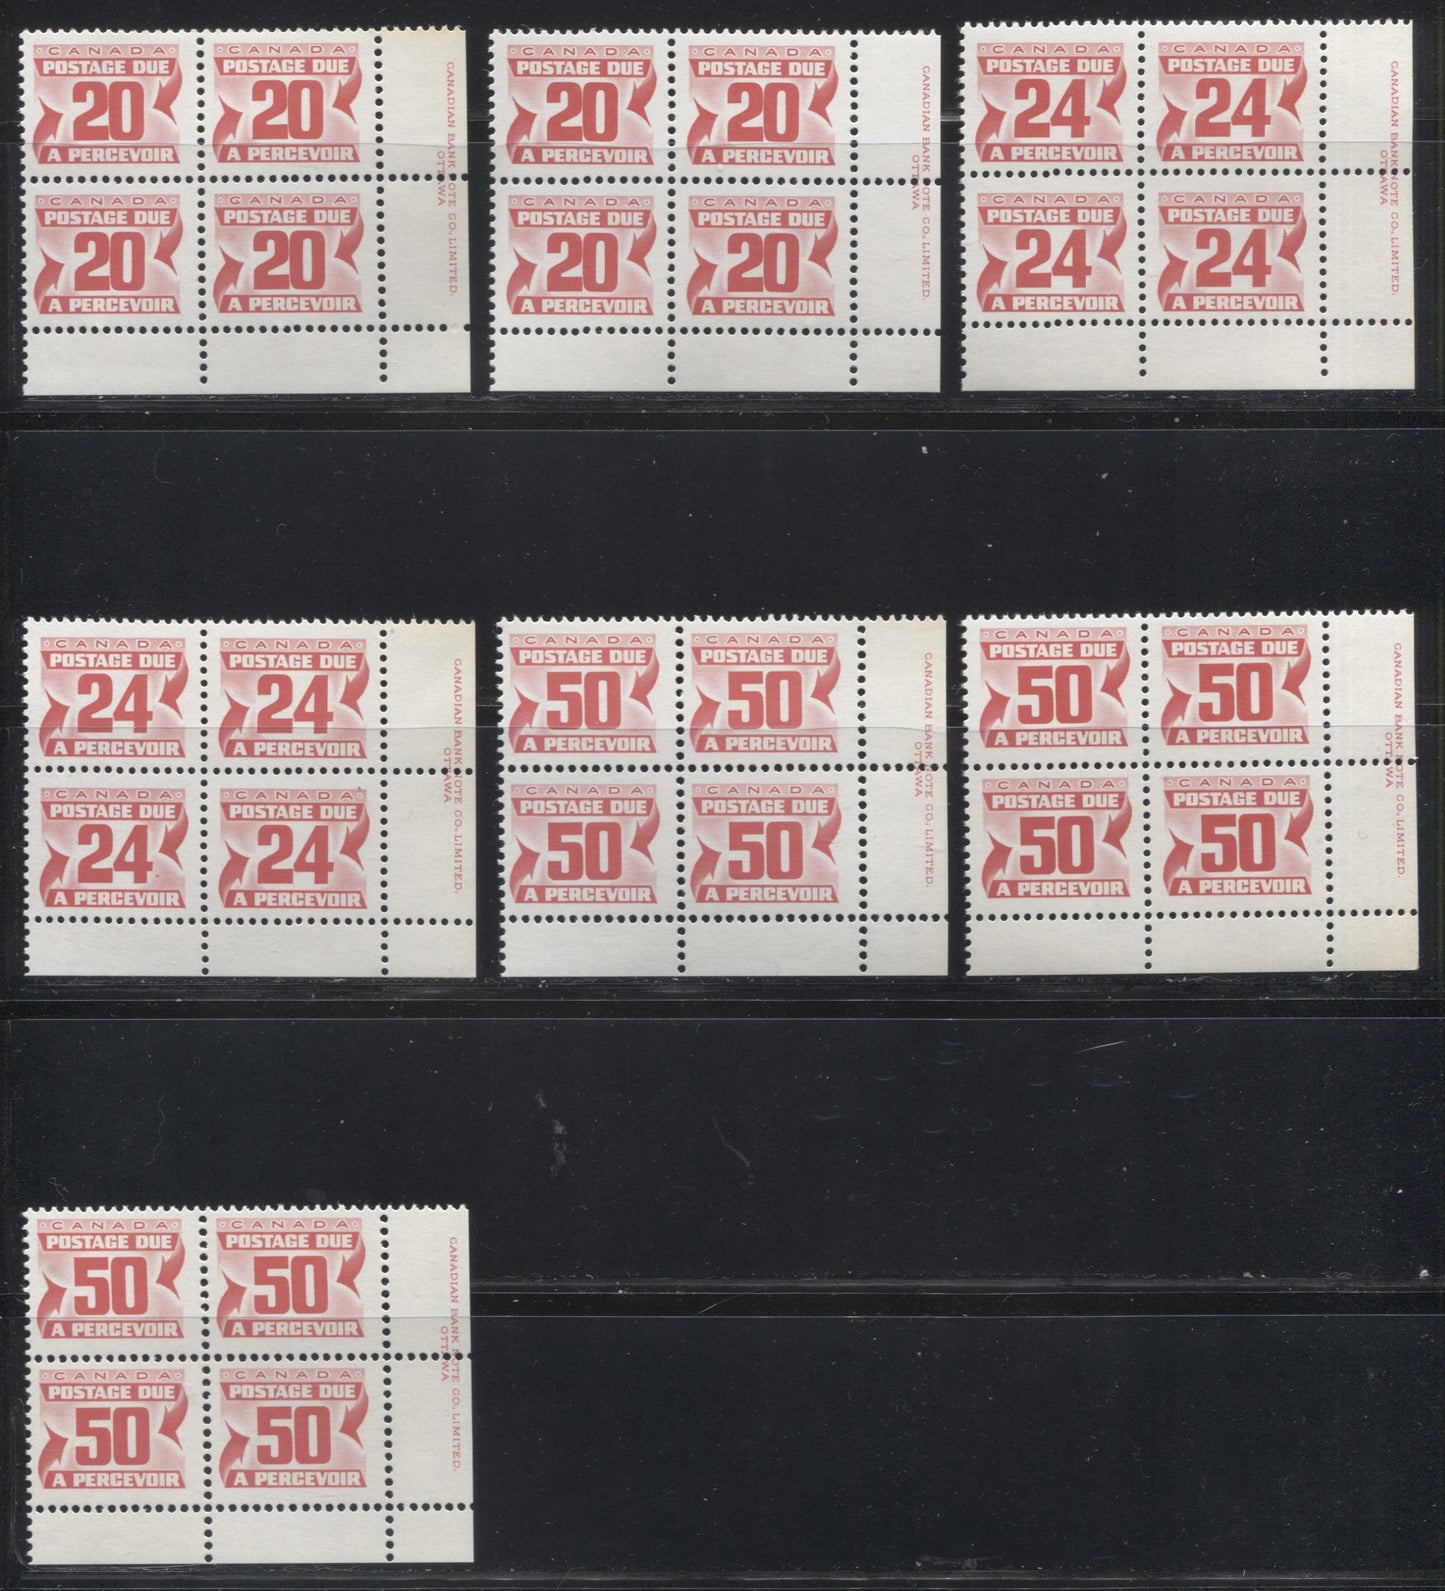 Lot 170 Canada #J38-40 20c, 24c & 50c Carmine Rose 1977-1982, 4th Centennial Postage Due Issue, 7 F/VFNH LR Inscription Blocks Of 4 On Various DF & LF-fl Papers With PVA Gums, Perf 12.5 x 12